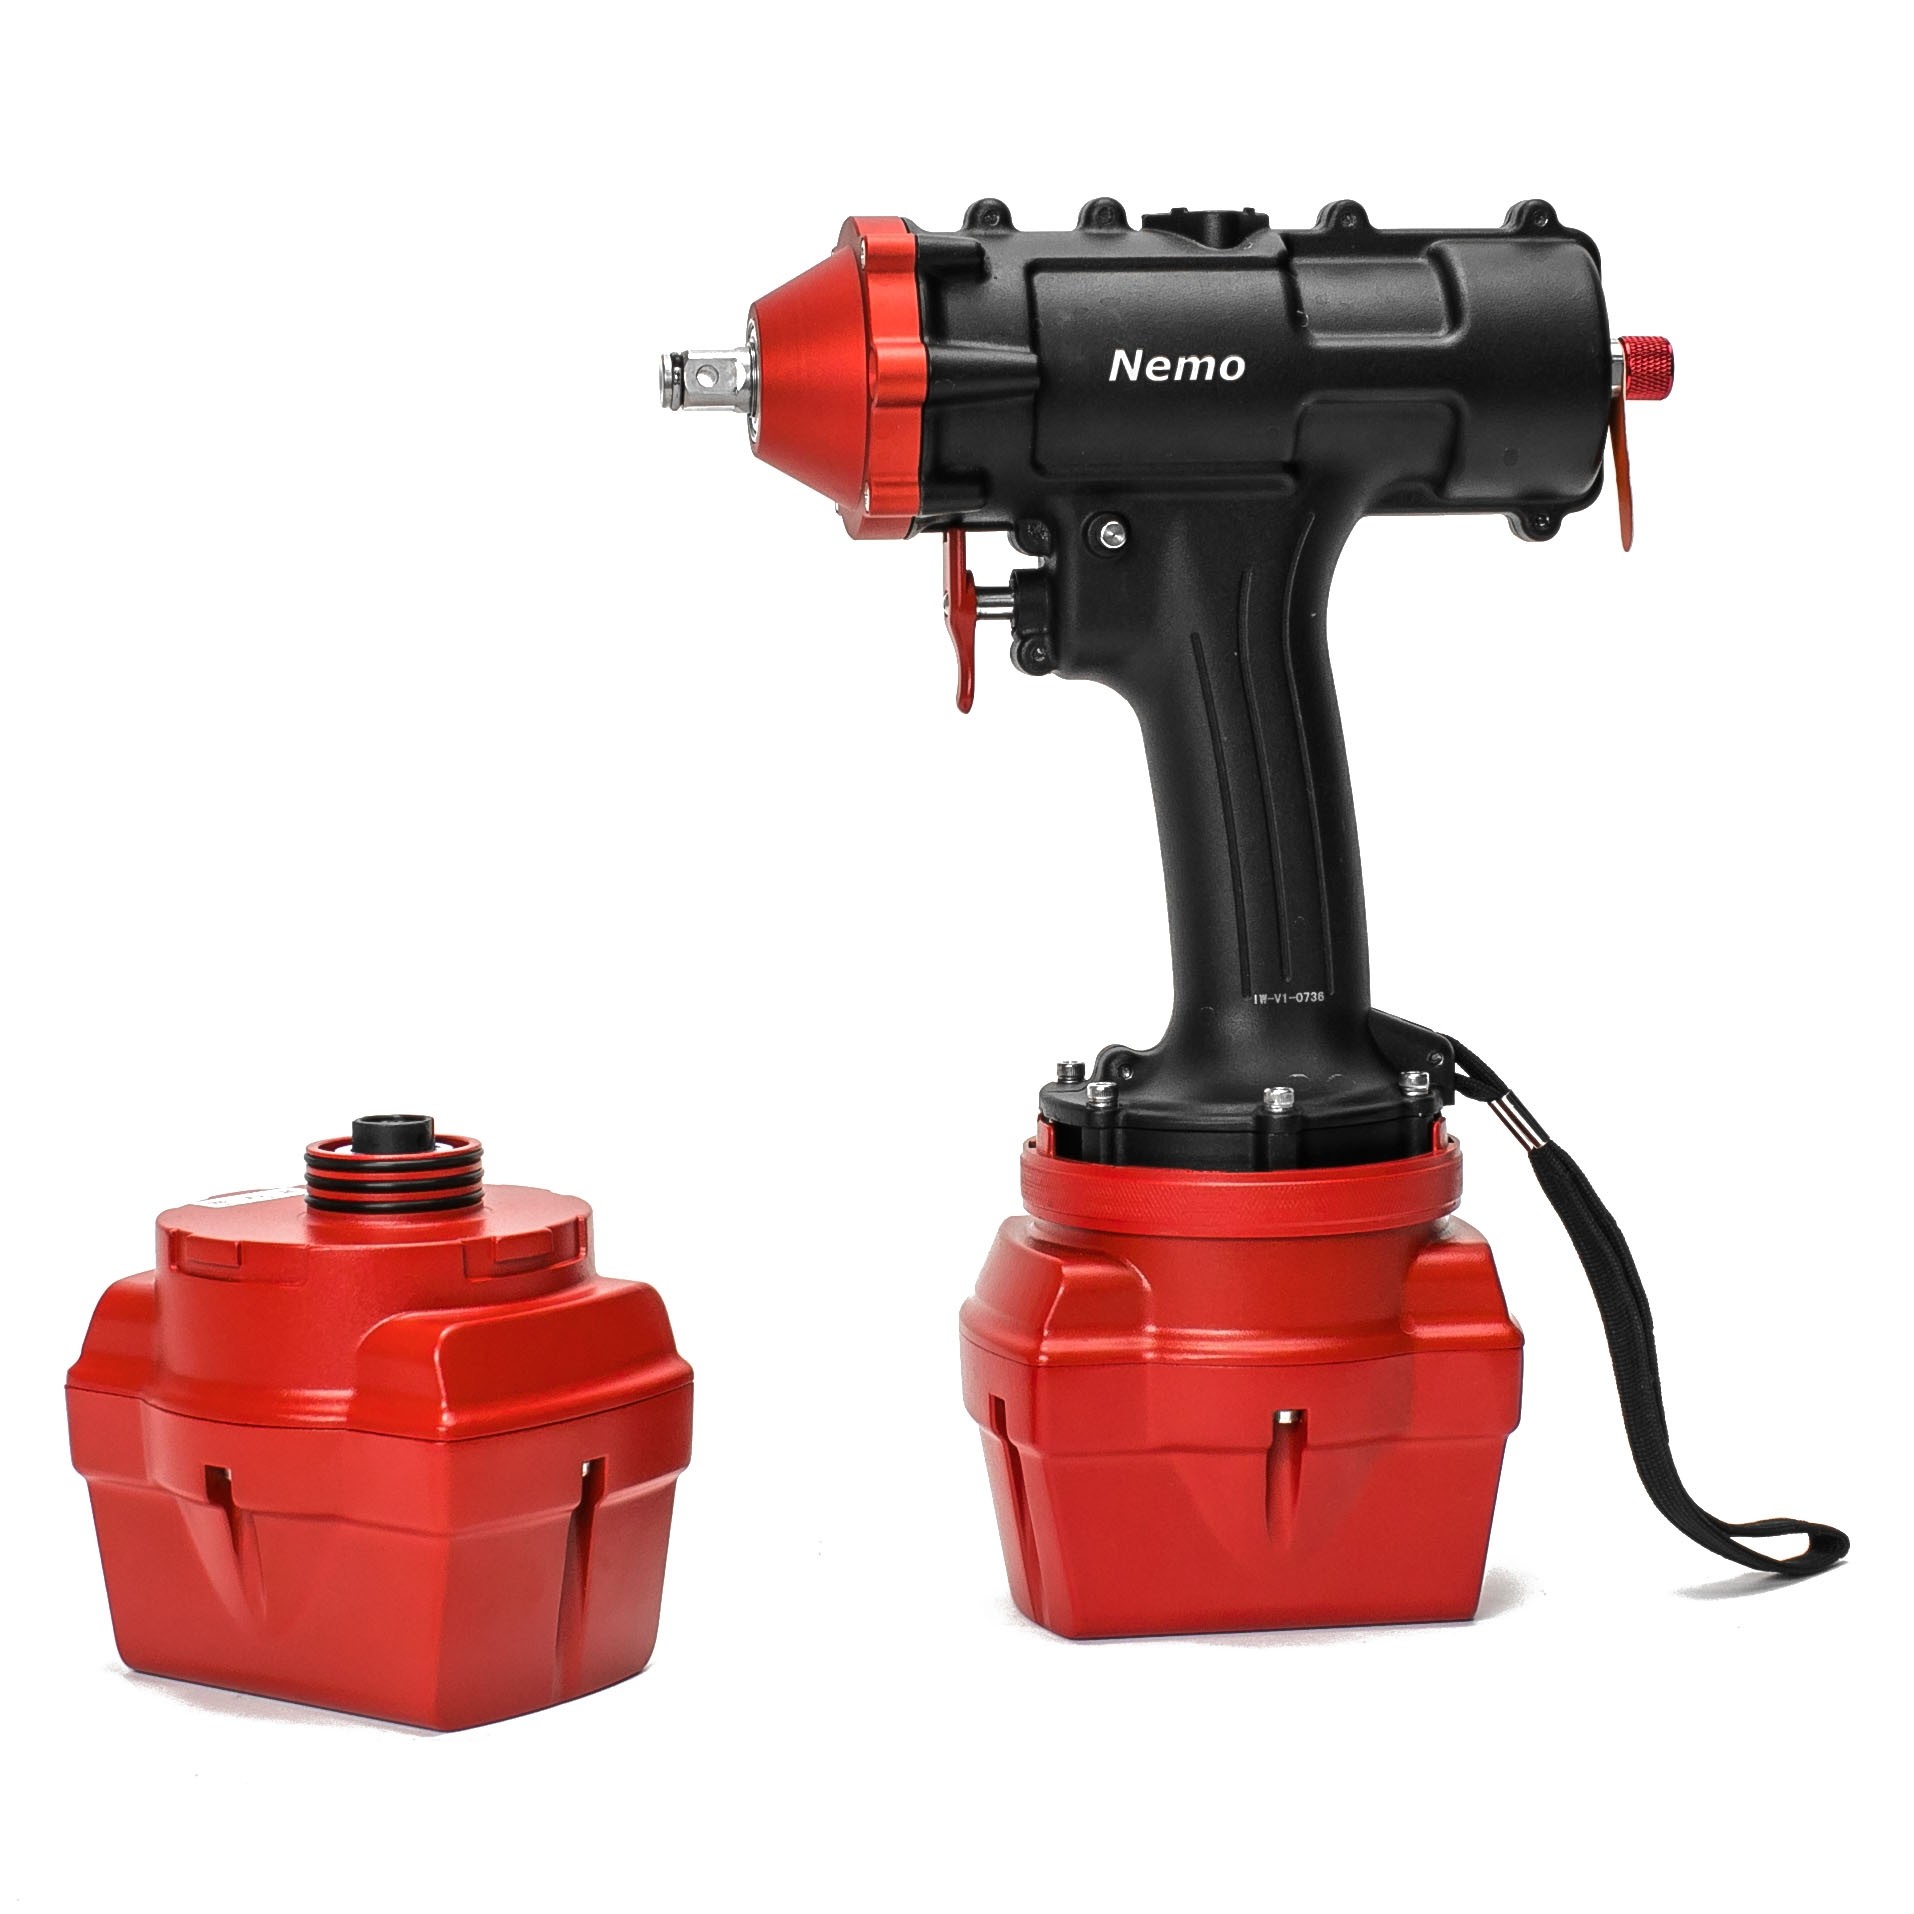 Nemo IW-18V-6Li-50 Cordless Underwater Impact Wrench - 1/2" Square Drive (Two 6Ah Batteries)